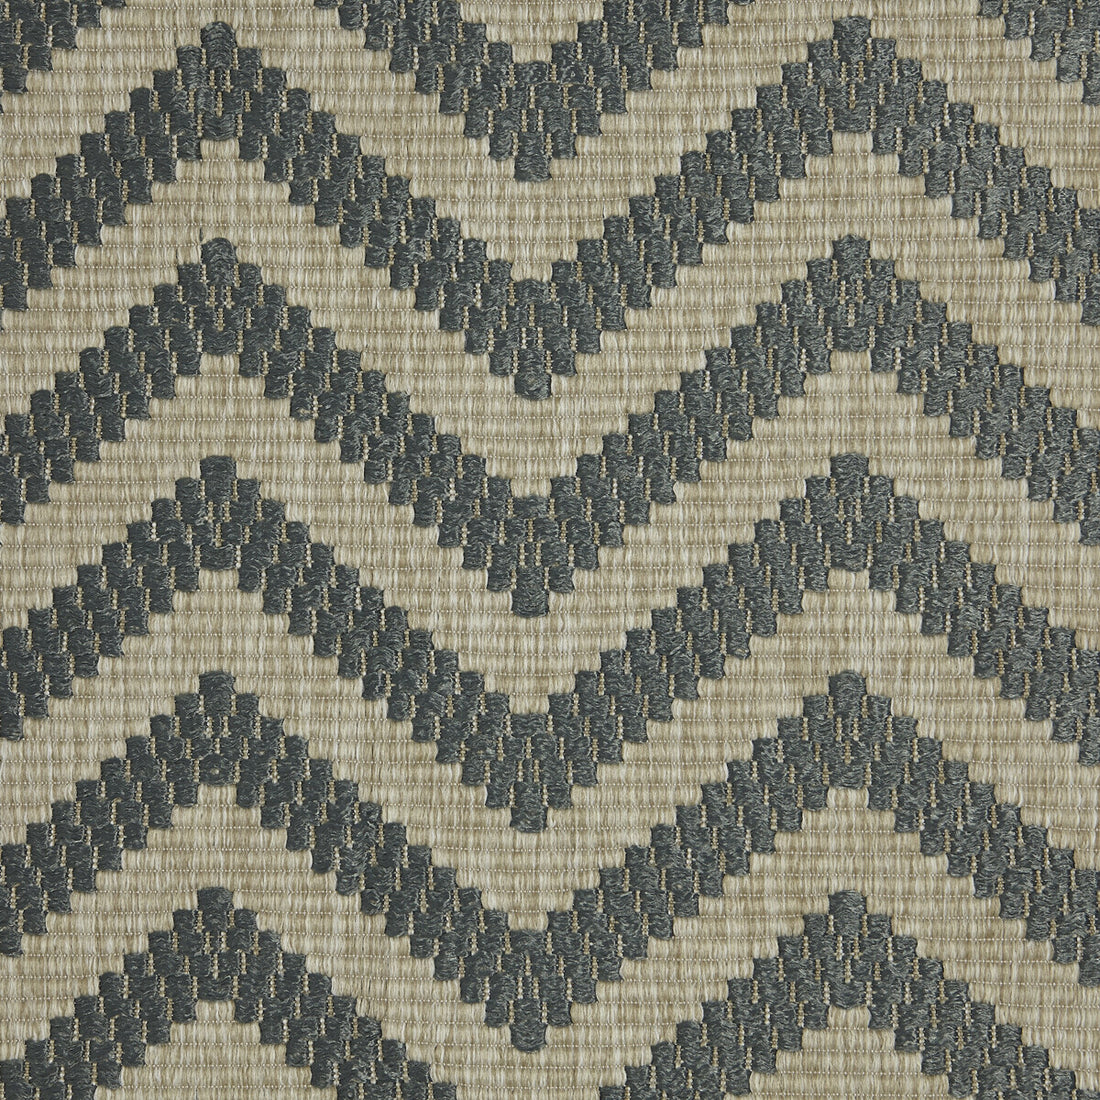 Marelle fabric in 4 color - pattern LZ-30347.04.0 - by Kravet Design in the Lizzo Indoor/Outdoor collection